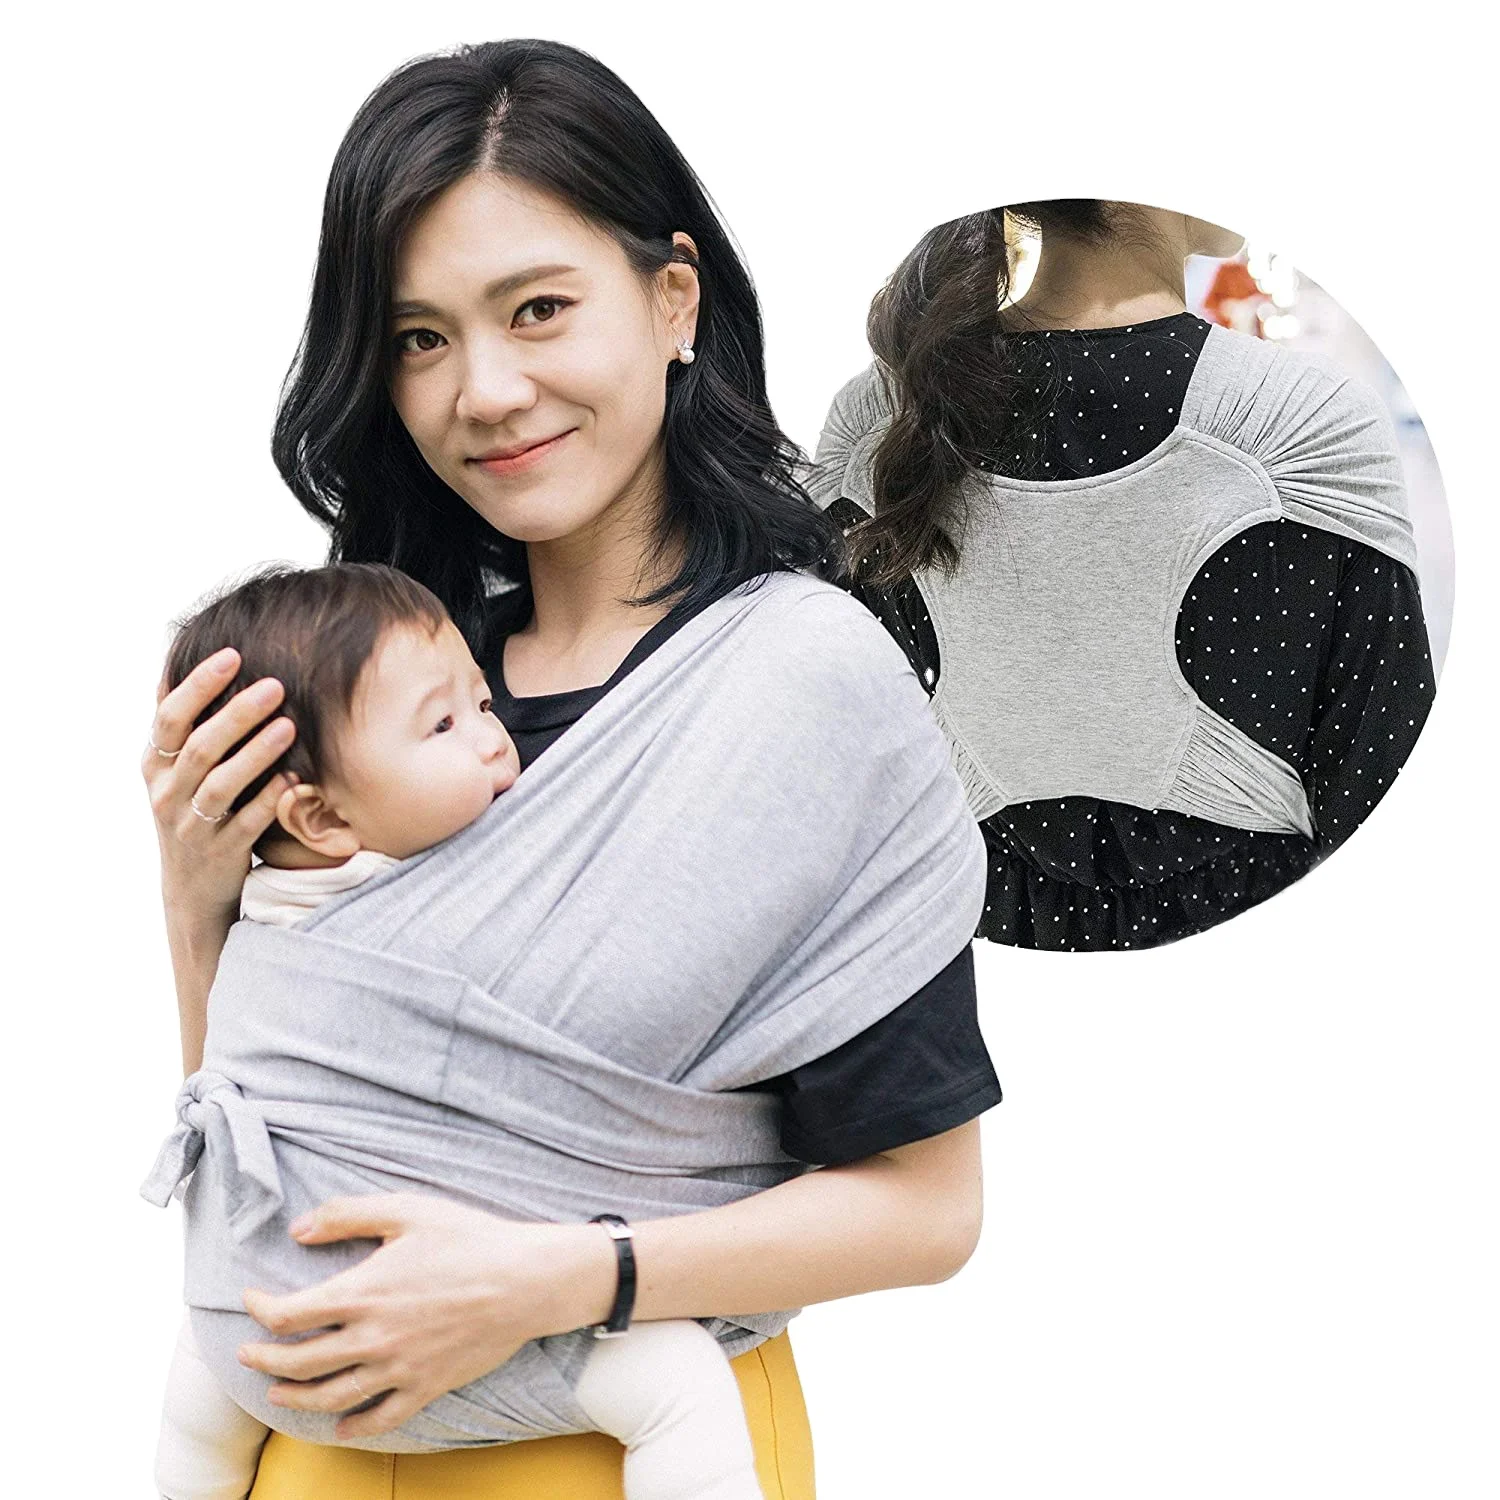 

Amazon Top One Sells breathable natural organic cotton baby sling carrier wrap for promotional